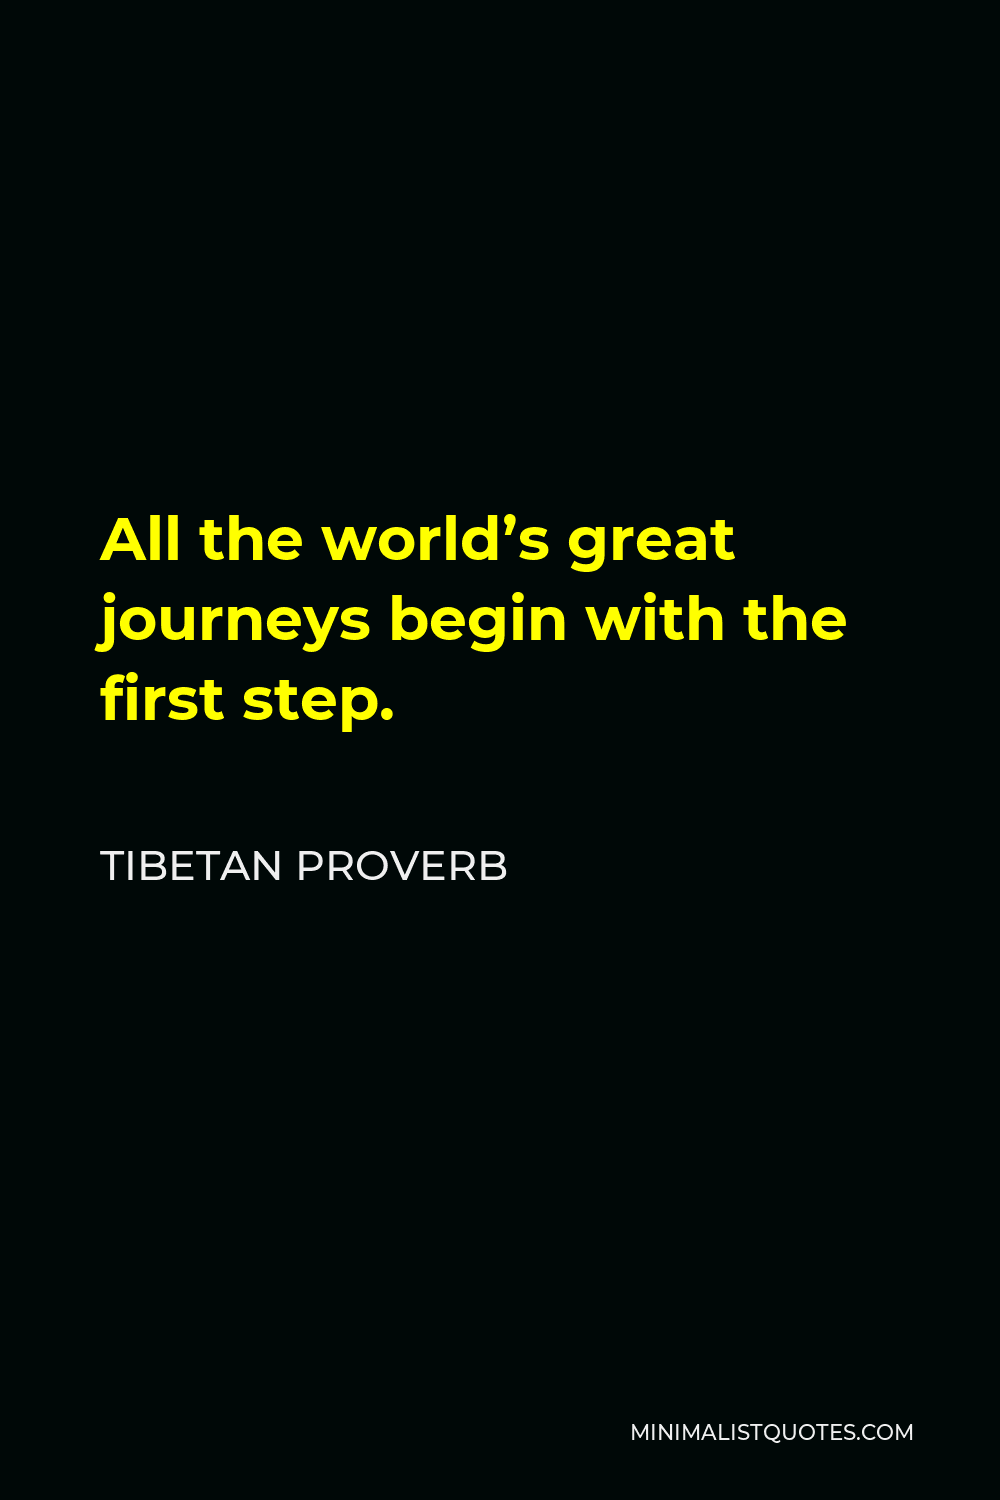 Tibetan Proverb Quote - All the world’s great journeys begin with the first step.